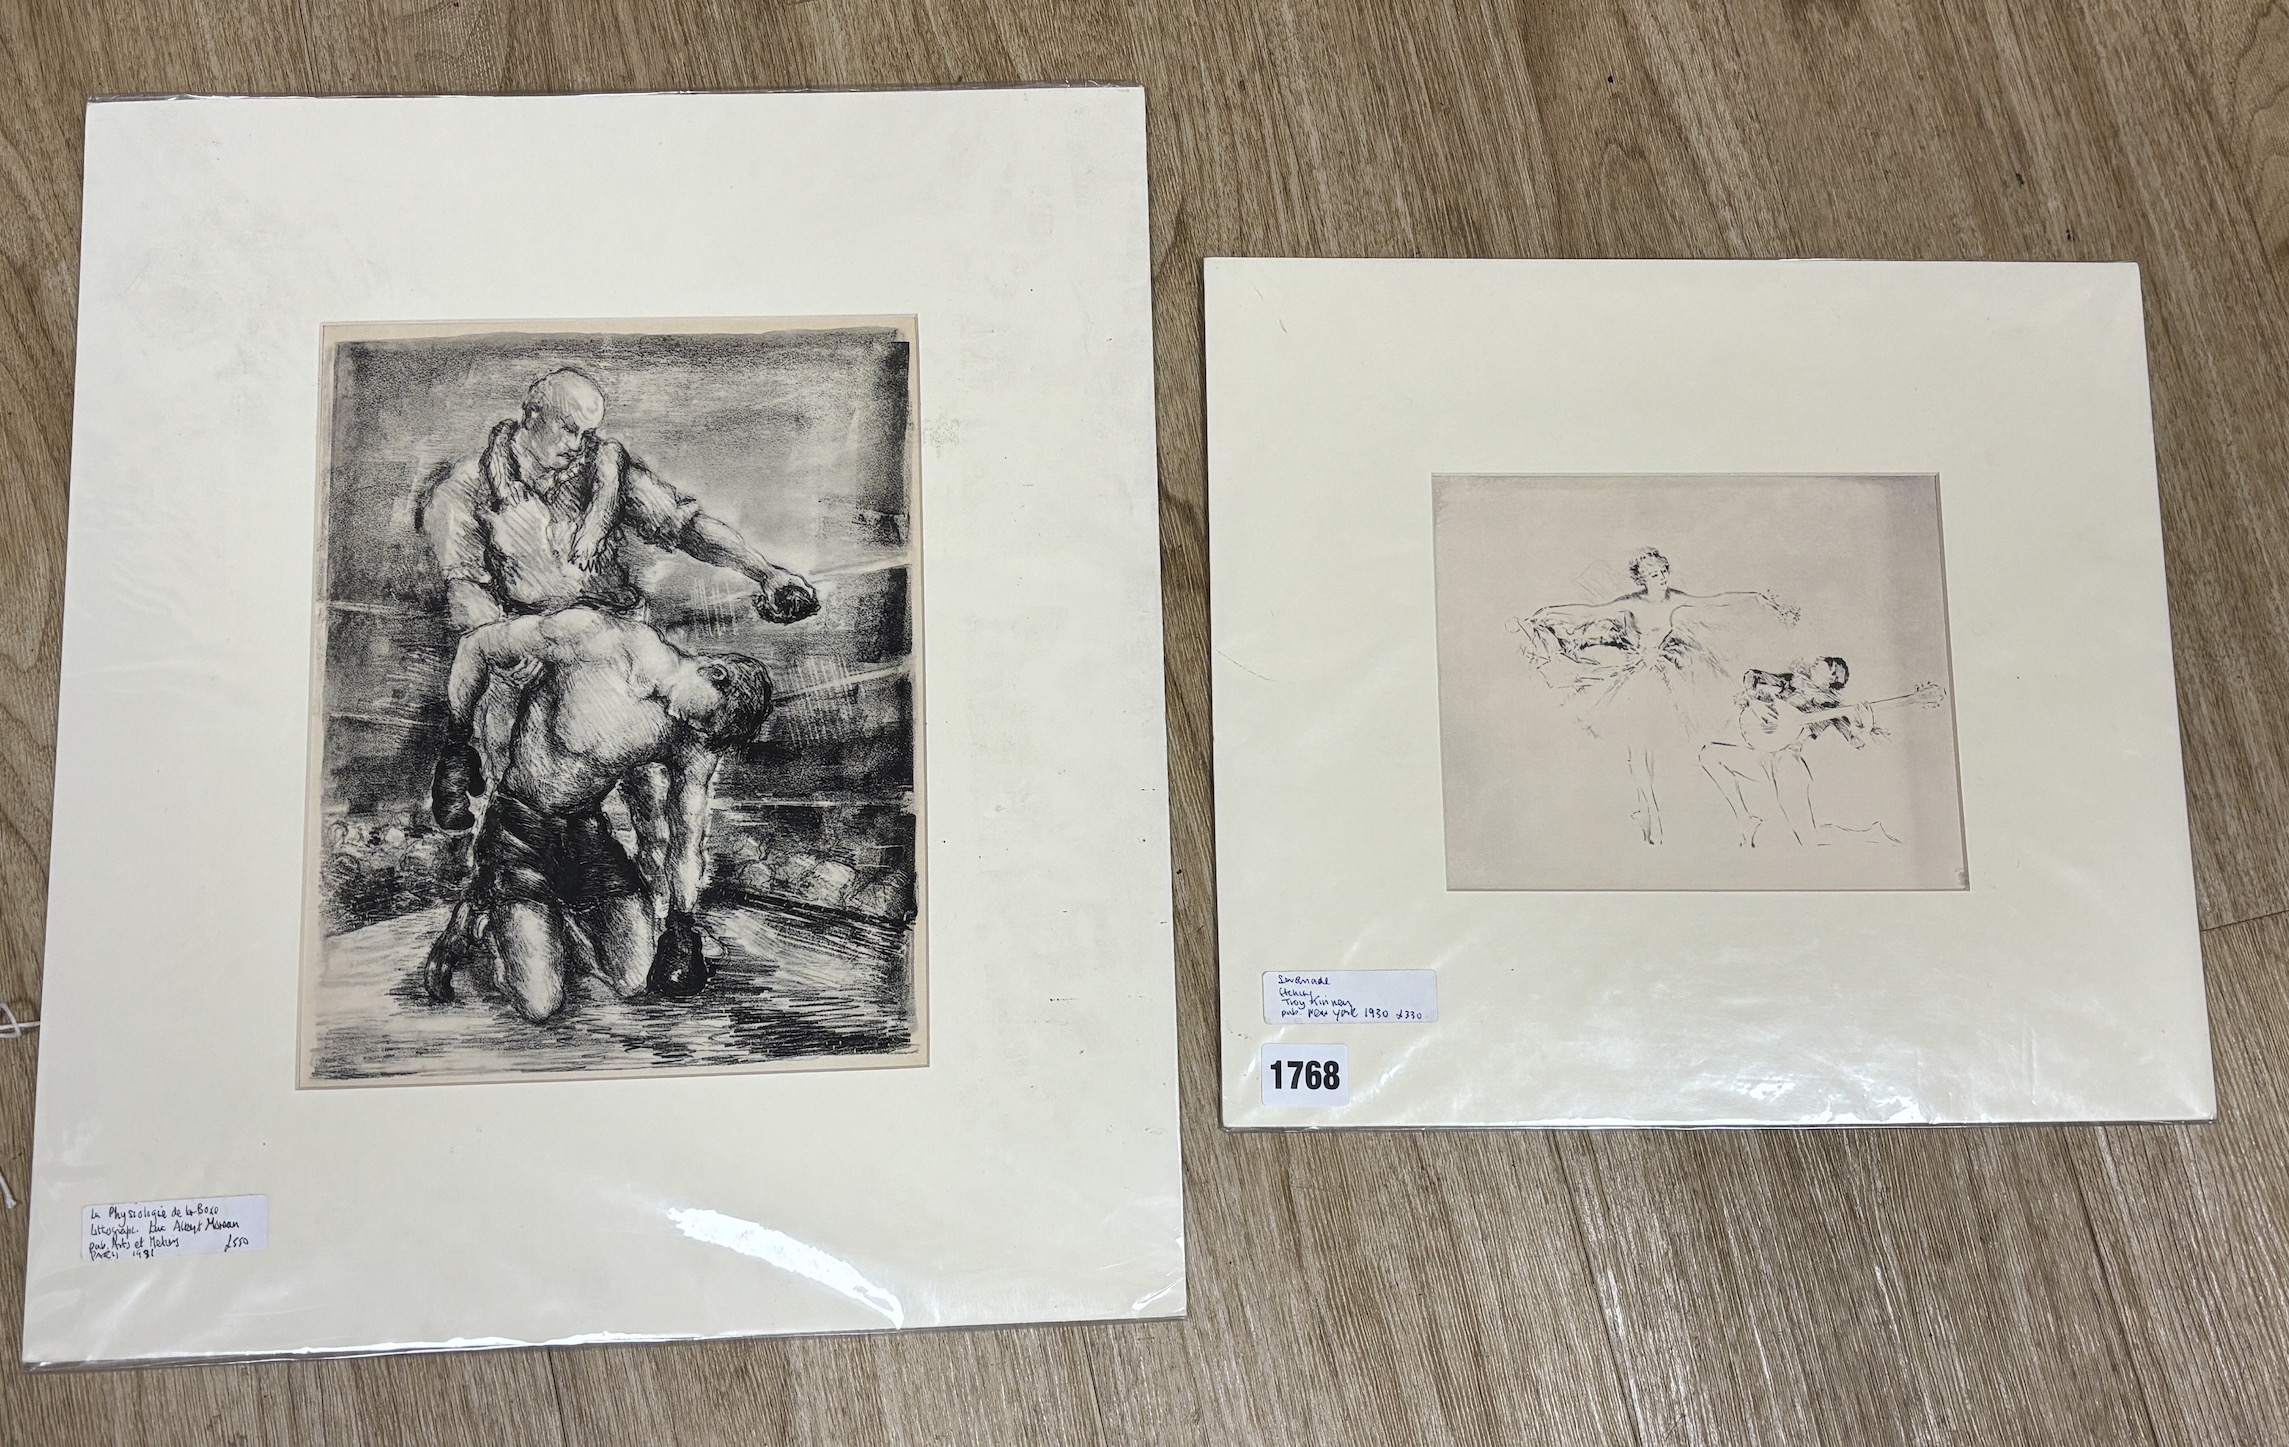 After Luc Albert Moreau (French, 1882-1948), lithograph, ‘La physiologie de la boxe’ and After Troy Kinney (American, 1871-1938), etching, ‘Serenade’, mounted, largest 28 x 21cm, unframed